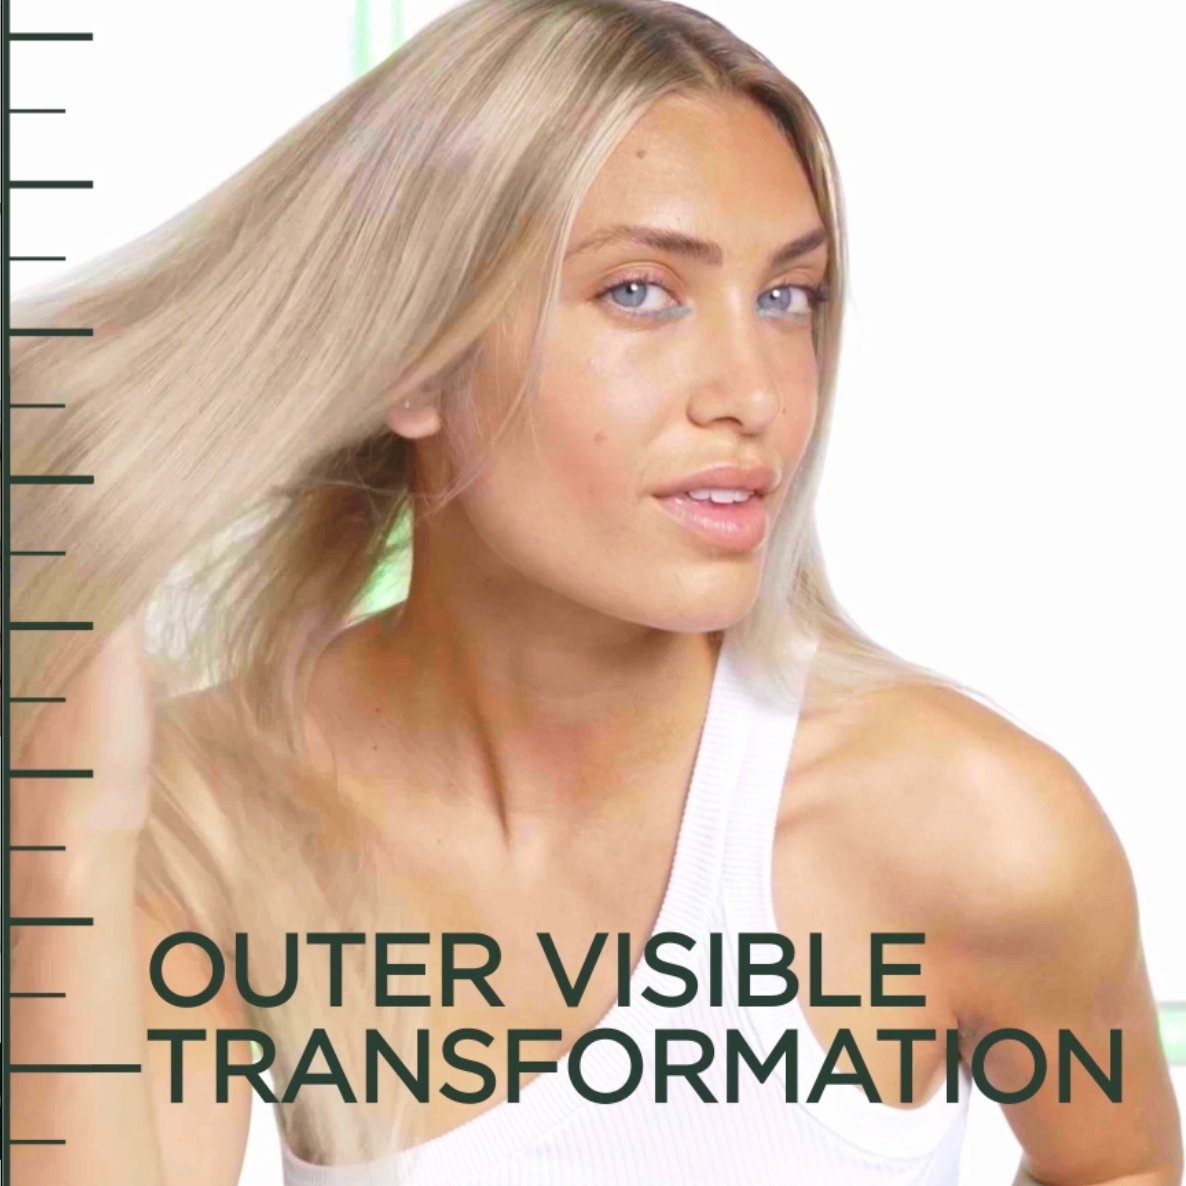 Outer visible transformation